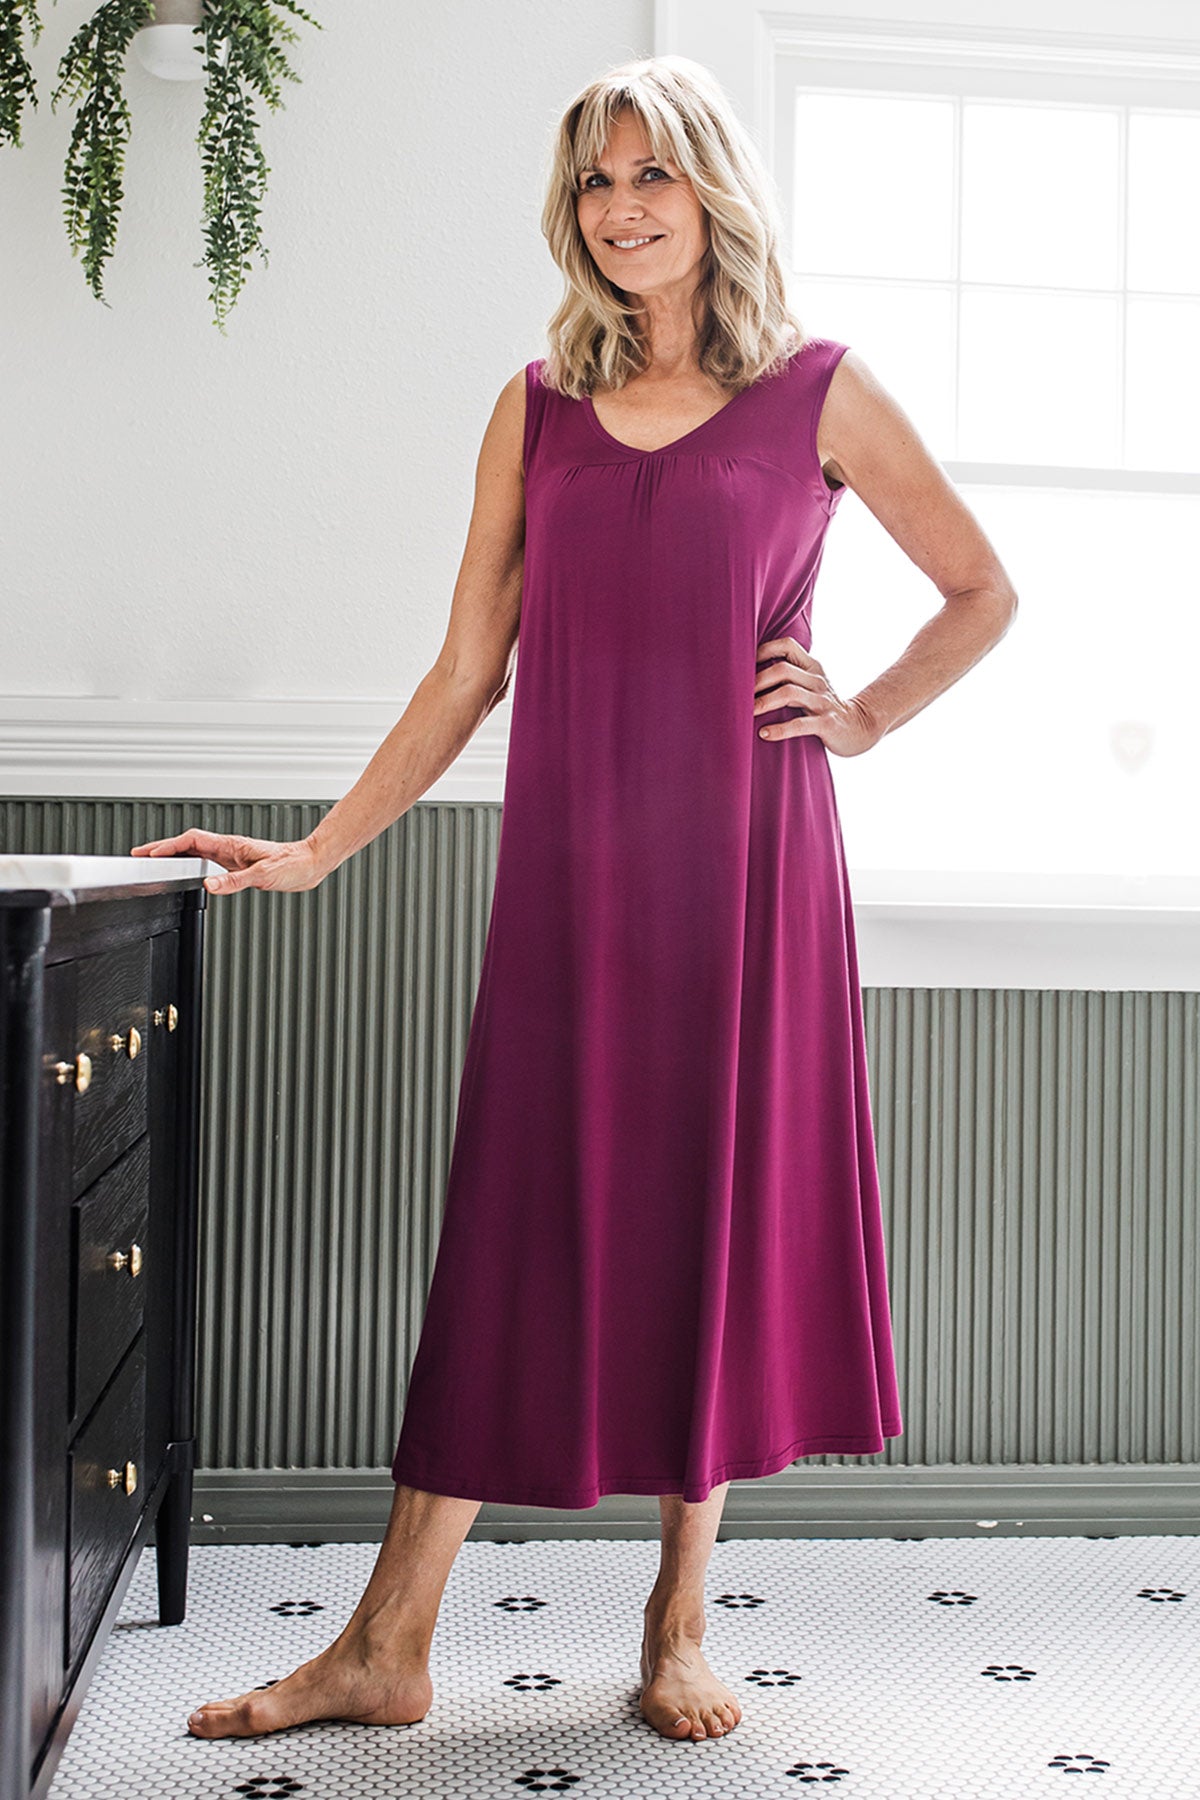 A woman standing next to cabinet and smiling, one hand on top of the cabinet and the other resting on her hip, wearing Yala Molly Sleeveless Bamboo Nightgown in Boysenberry